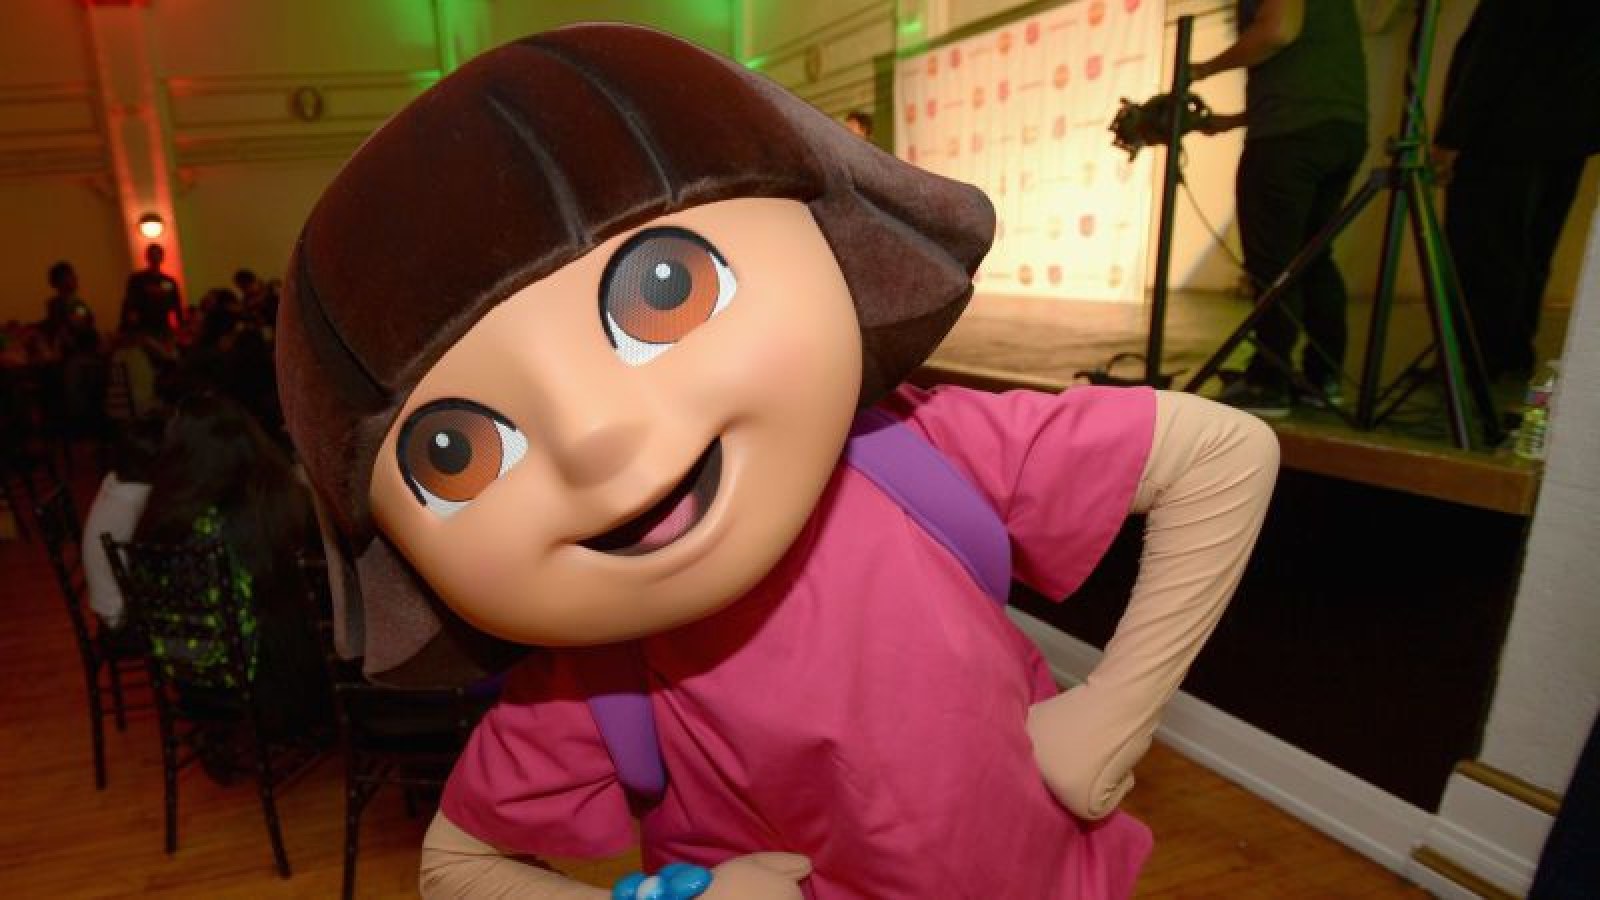 No Michael Bay Is Not The Dora The Explorer Live Action Movie Producer